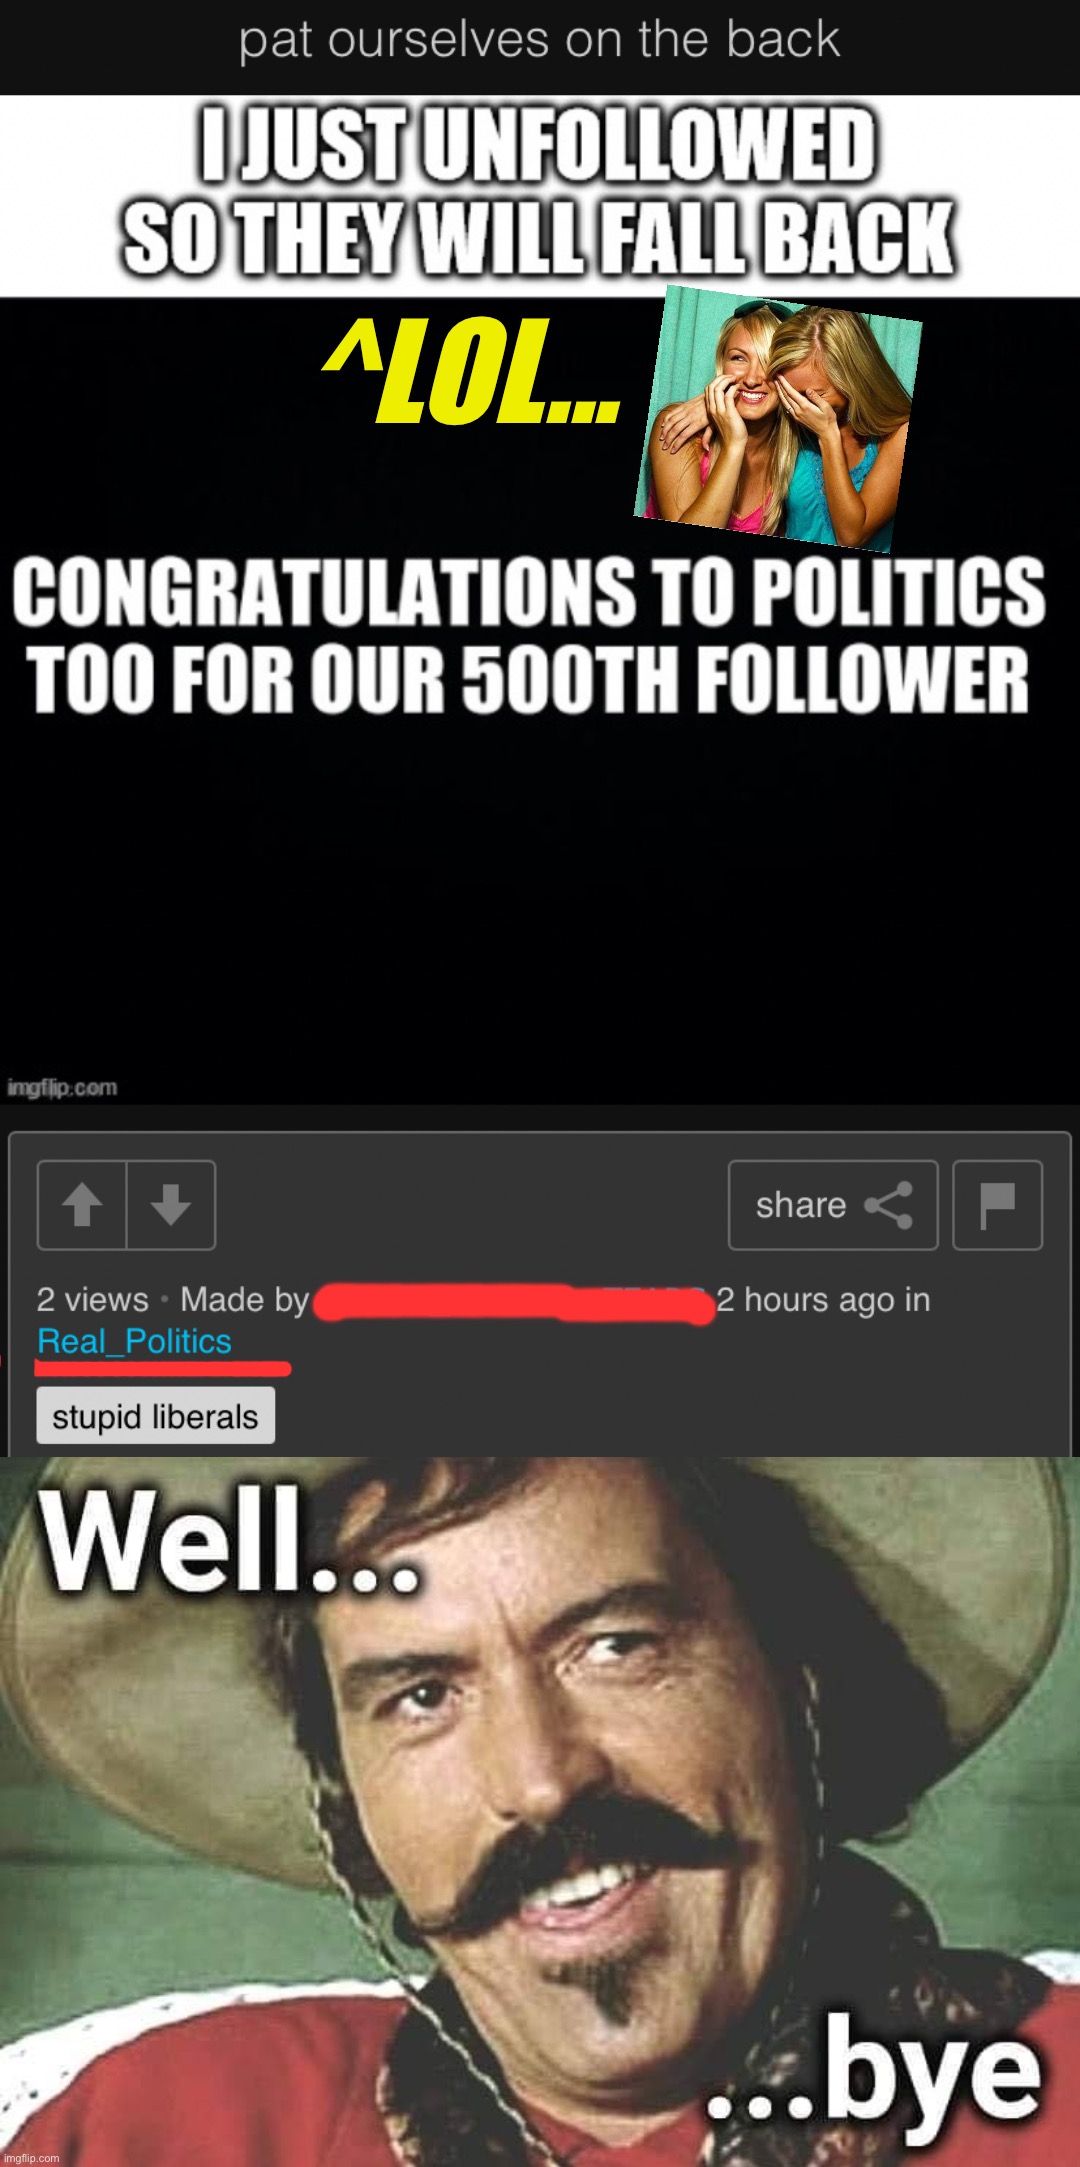 Aaaaaaaand we’re back up to 500 followers again. Minus one troll! | ^LOL... | image tagged in tombstone unfriended talking shit about trump well bye,meanwhile on imgflip,meme stream,followers,imgflip trolls,imgflip humor | made w/ Imgflip meme maker